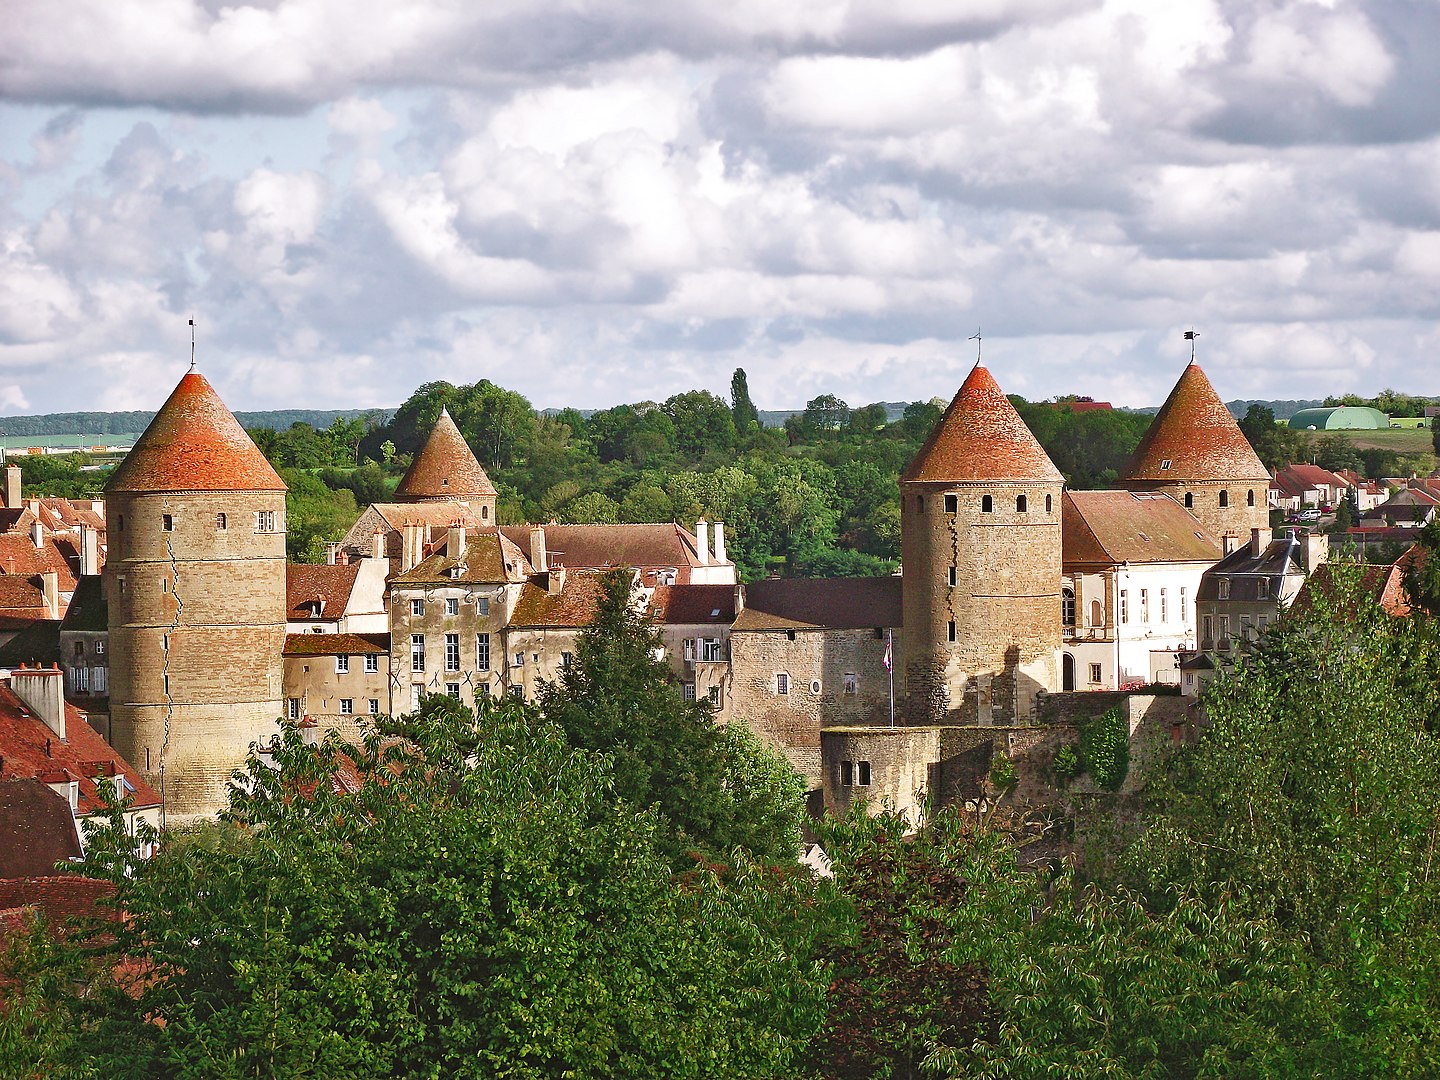 Semur-en-Auxois © Michel FOUCHER - licence [CC BY-SA 4.0] from Wikimedia Commons